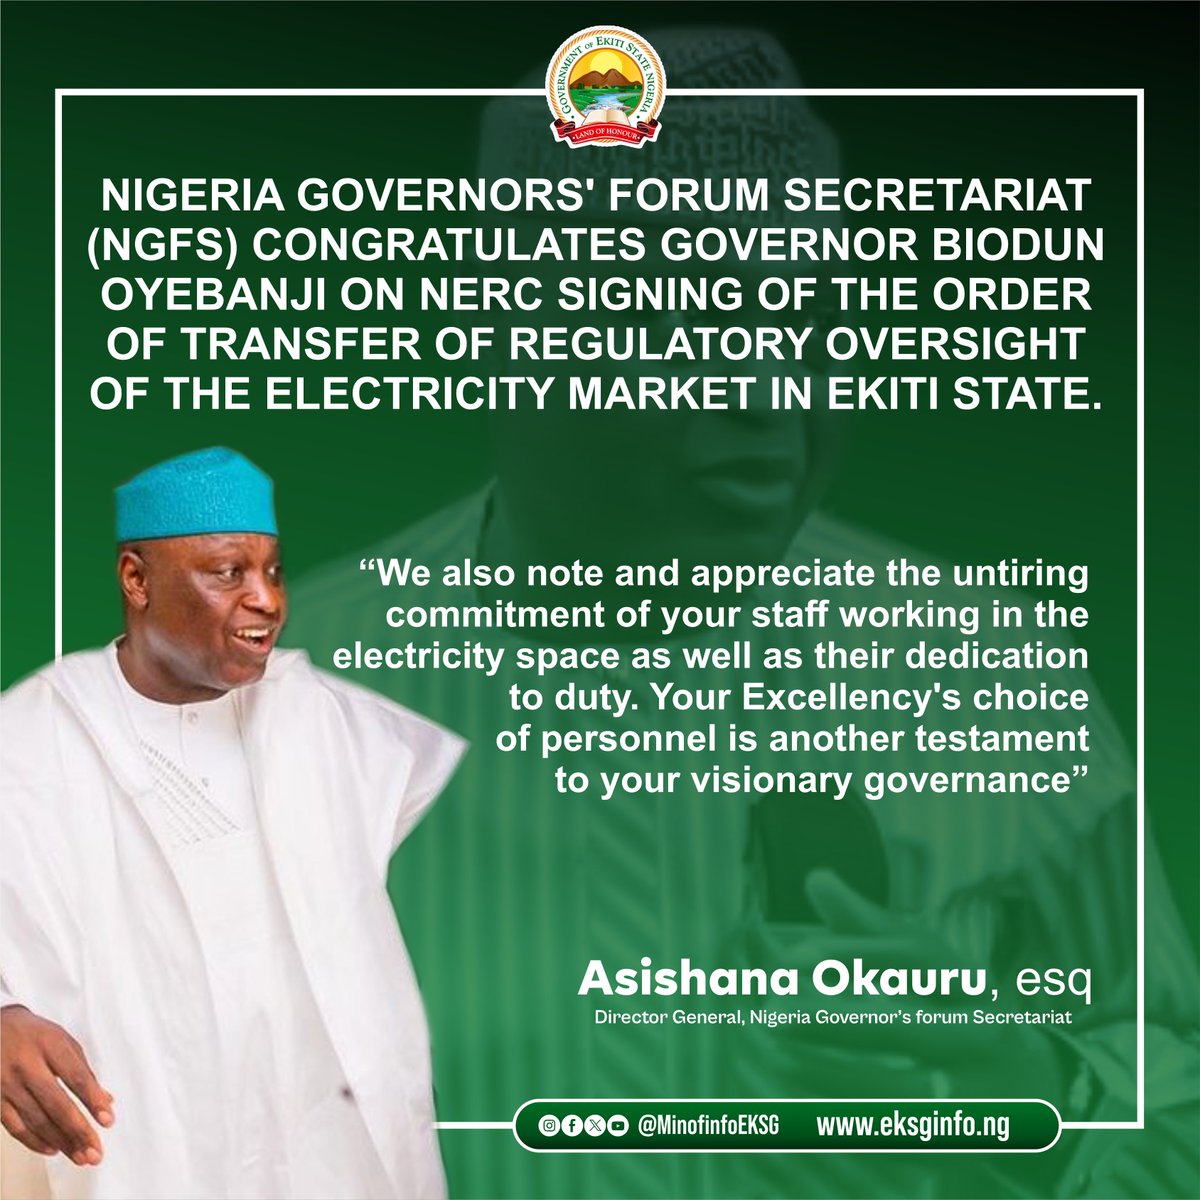 The Nigeria Governors' Forum Secretariat (NGFS) congratulates Governor Biodun Oyebanji on the NERC signing of the Order of Transfer of Regulatory Oversight of the electricity market in Ekiti State.